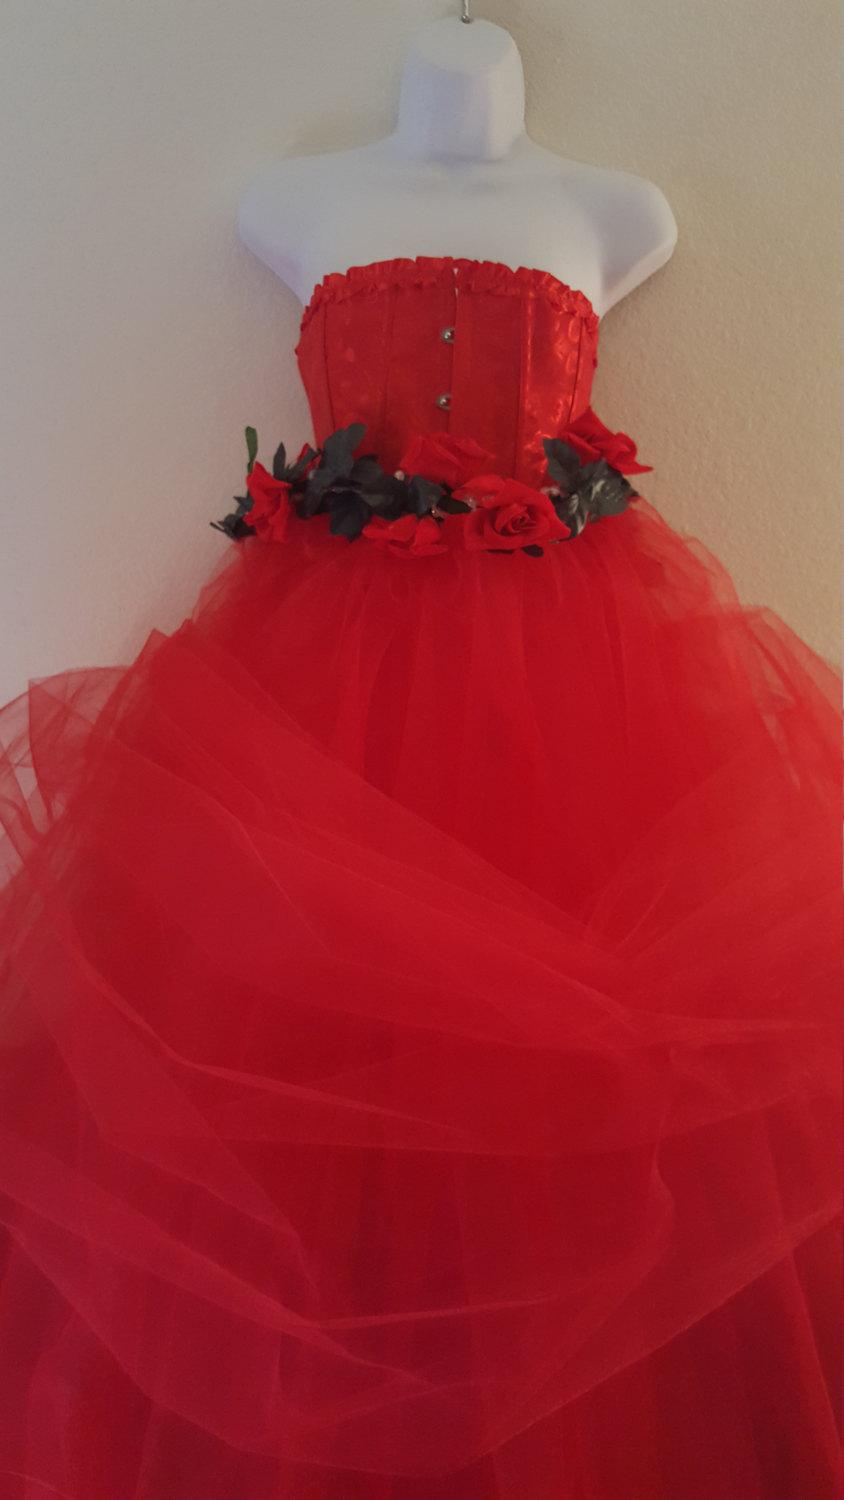 Wedding - Victorian Inspired Valentine Rose Goddess Romantic Red Corset Tulle Ball Gown Dress Bridal Wedding Gown Party Costume